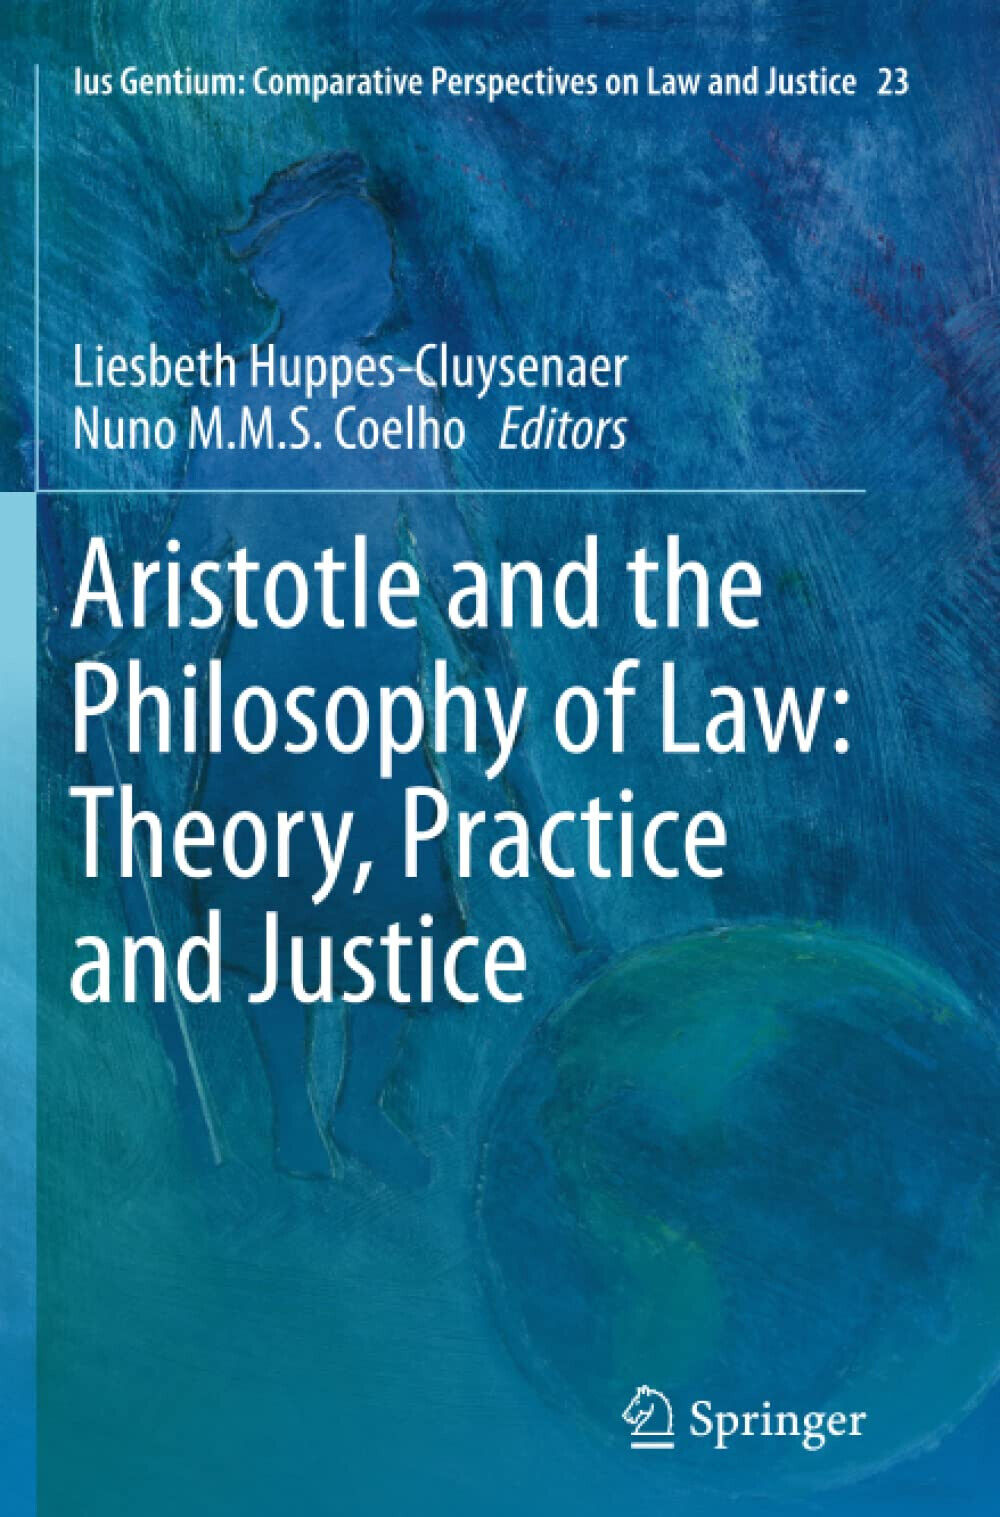 Aristotle and The Philosophy of Law: Theory, Practice and Justice - 2015